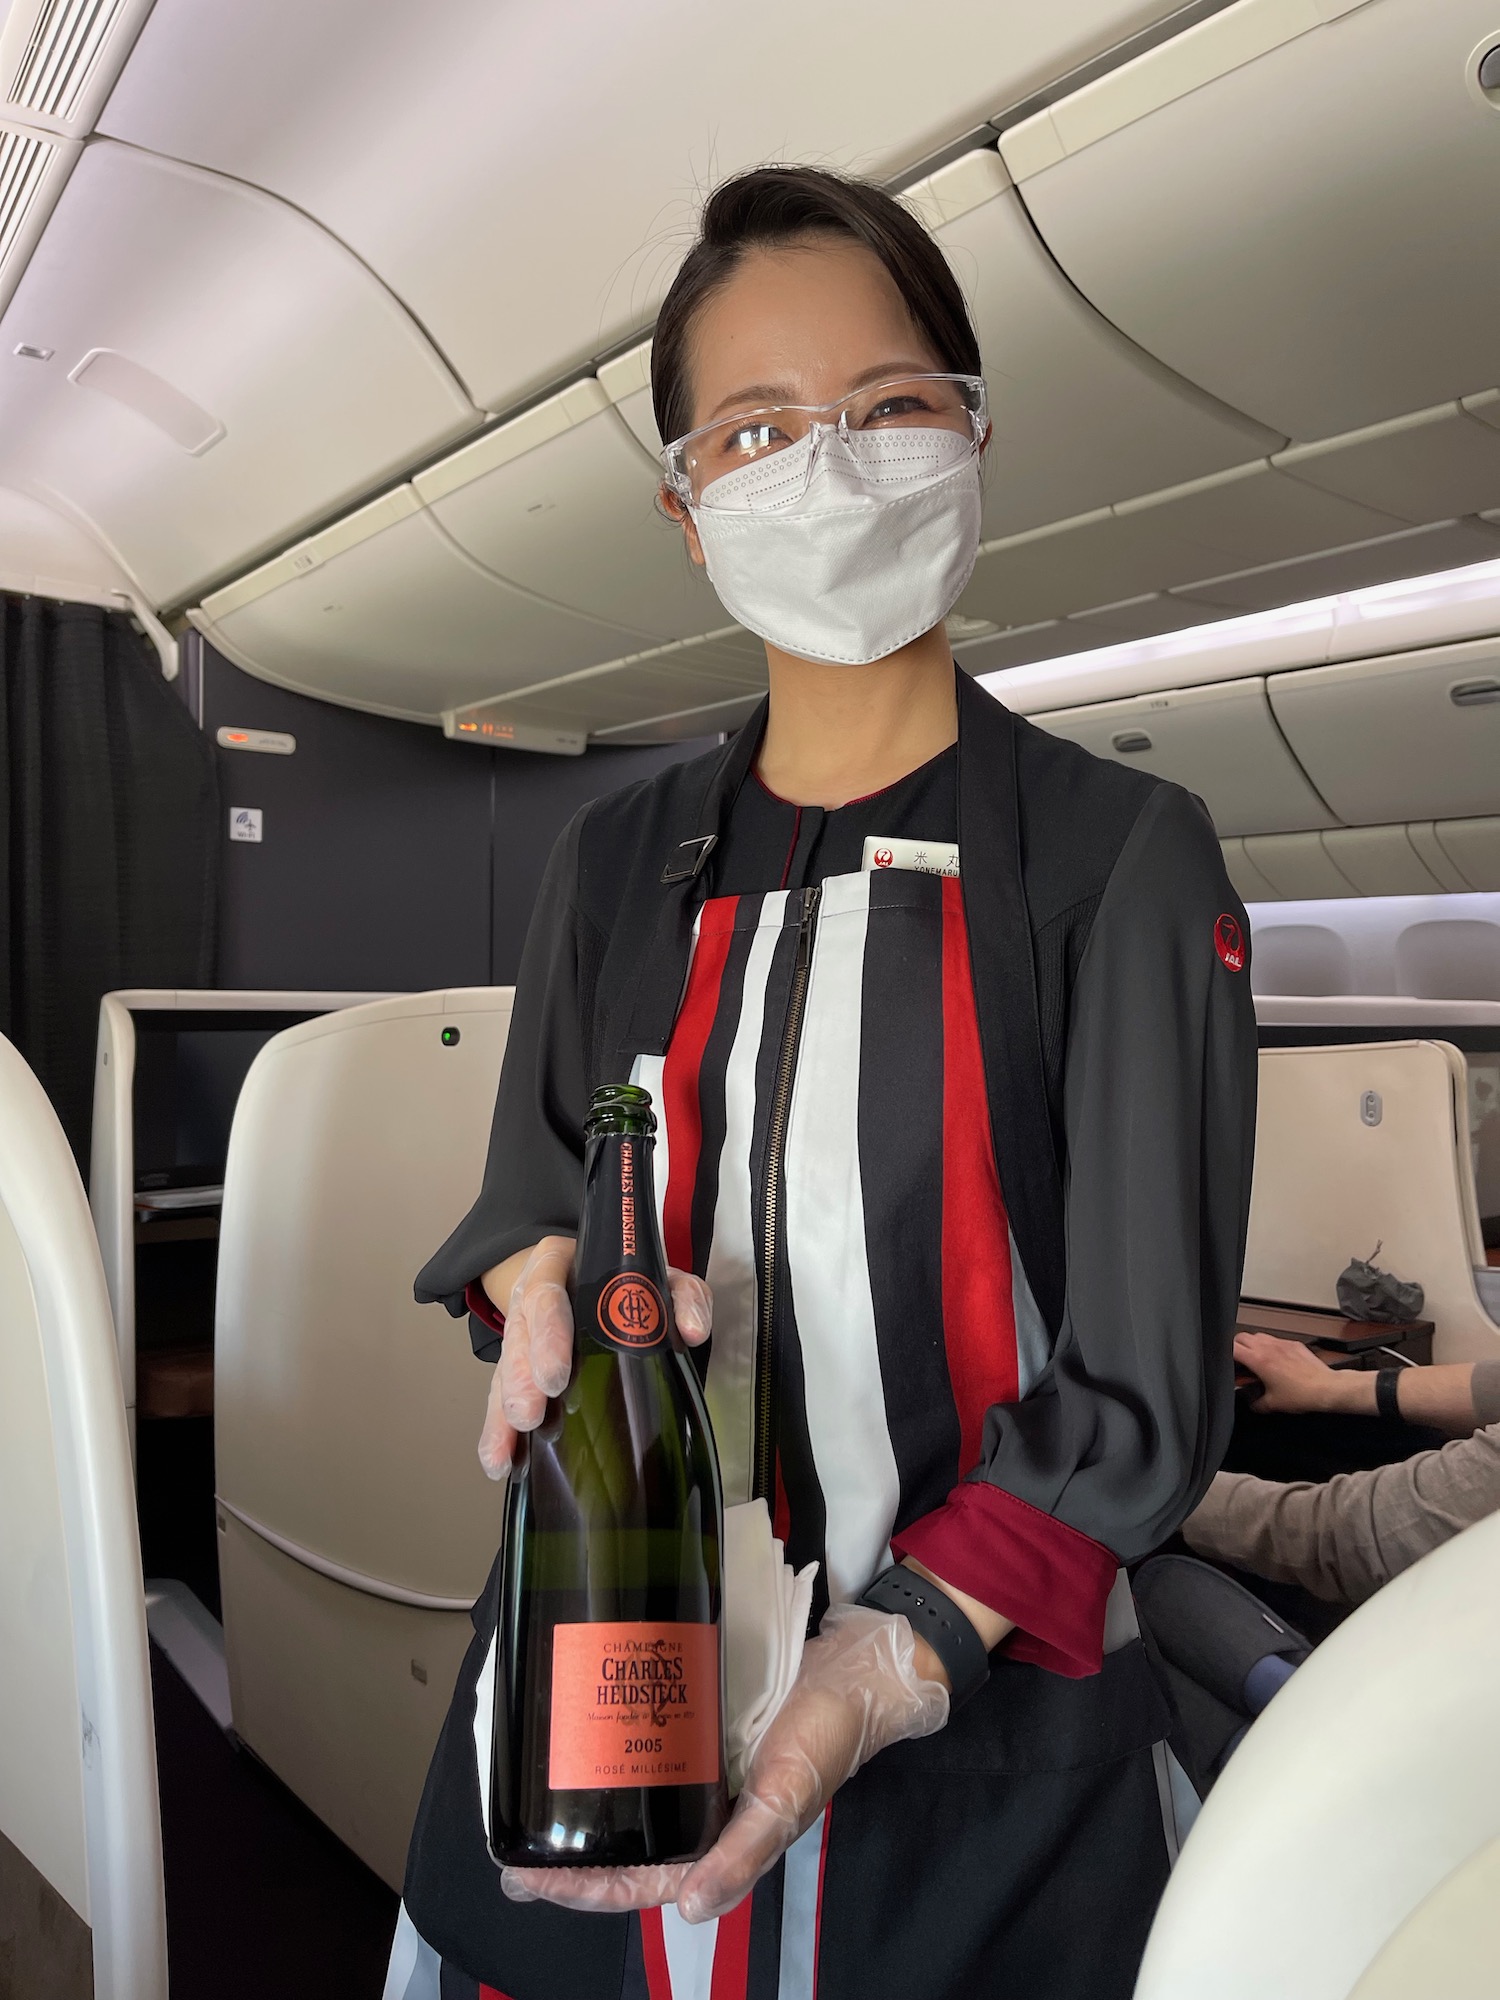 a woman wearing a mask and gloves holding a bottle of champagne